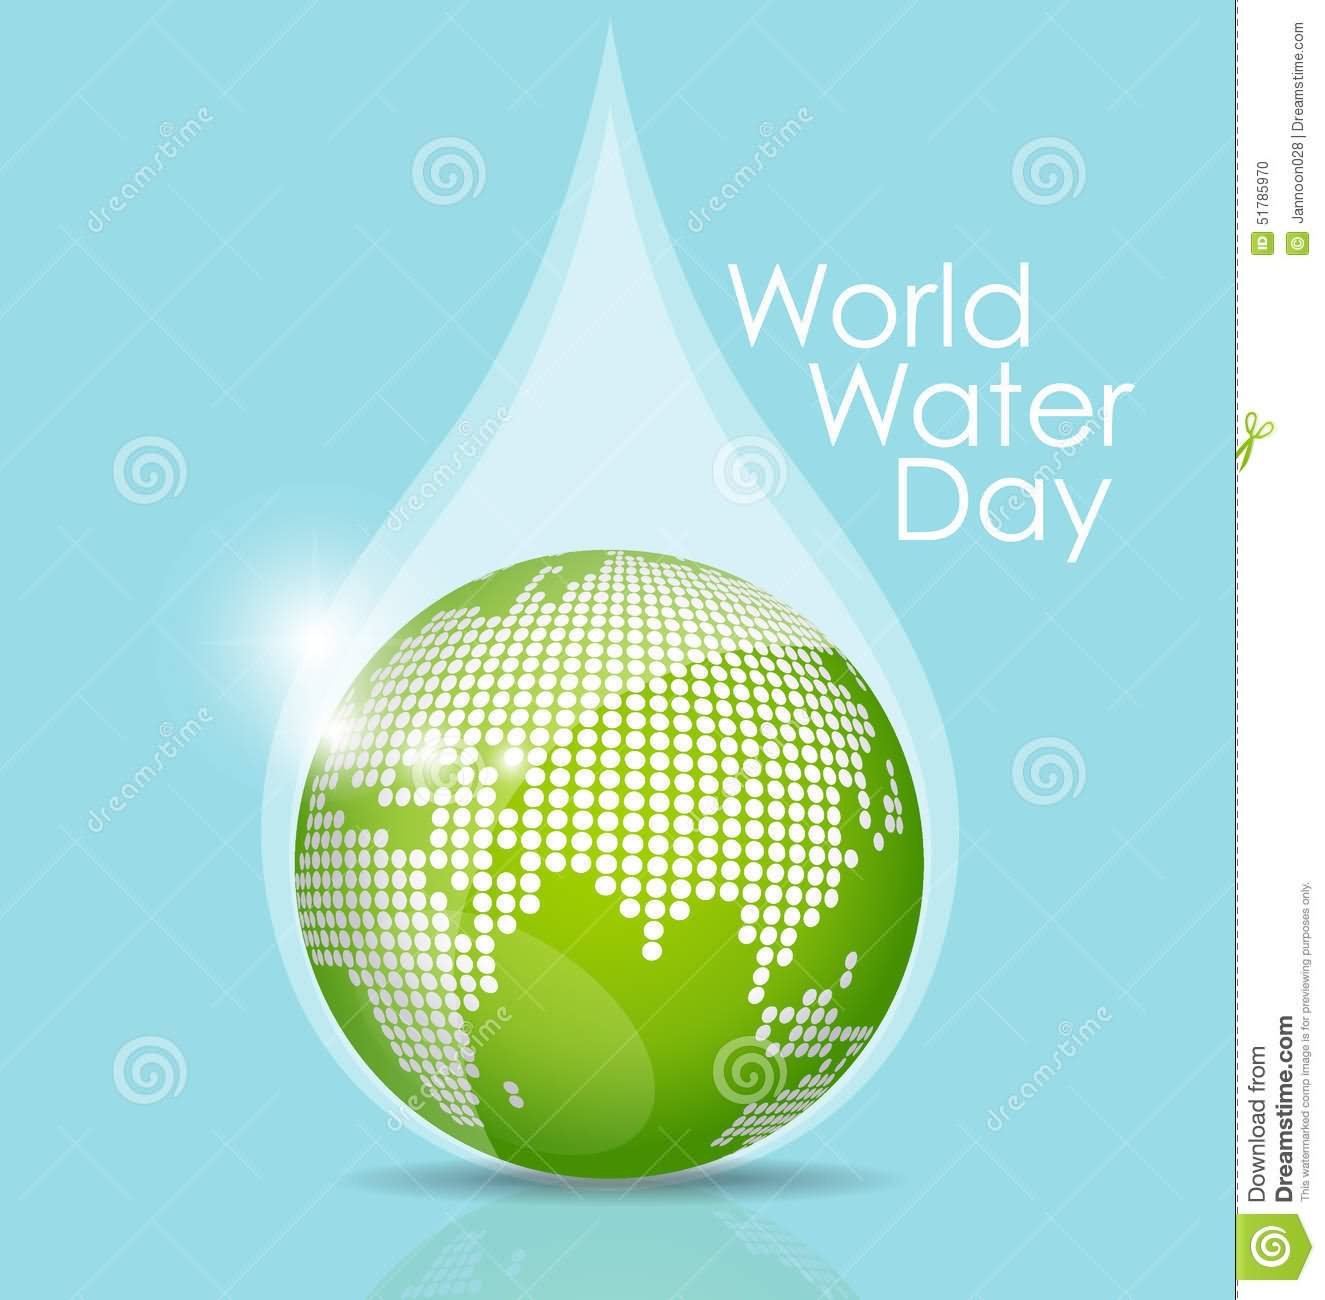 World Water Day Image Picture